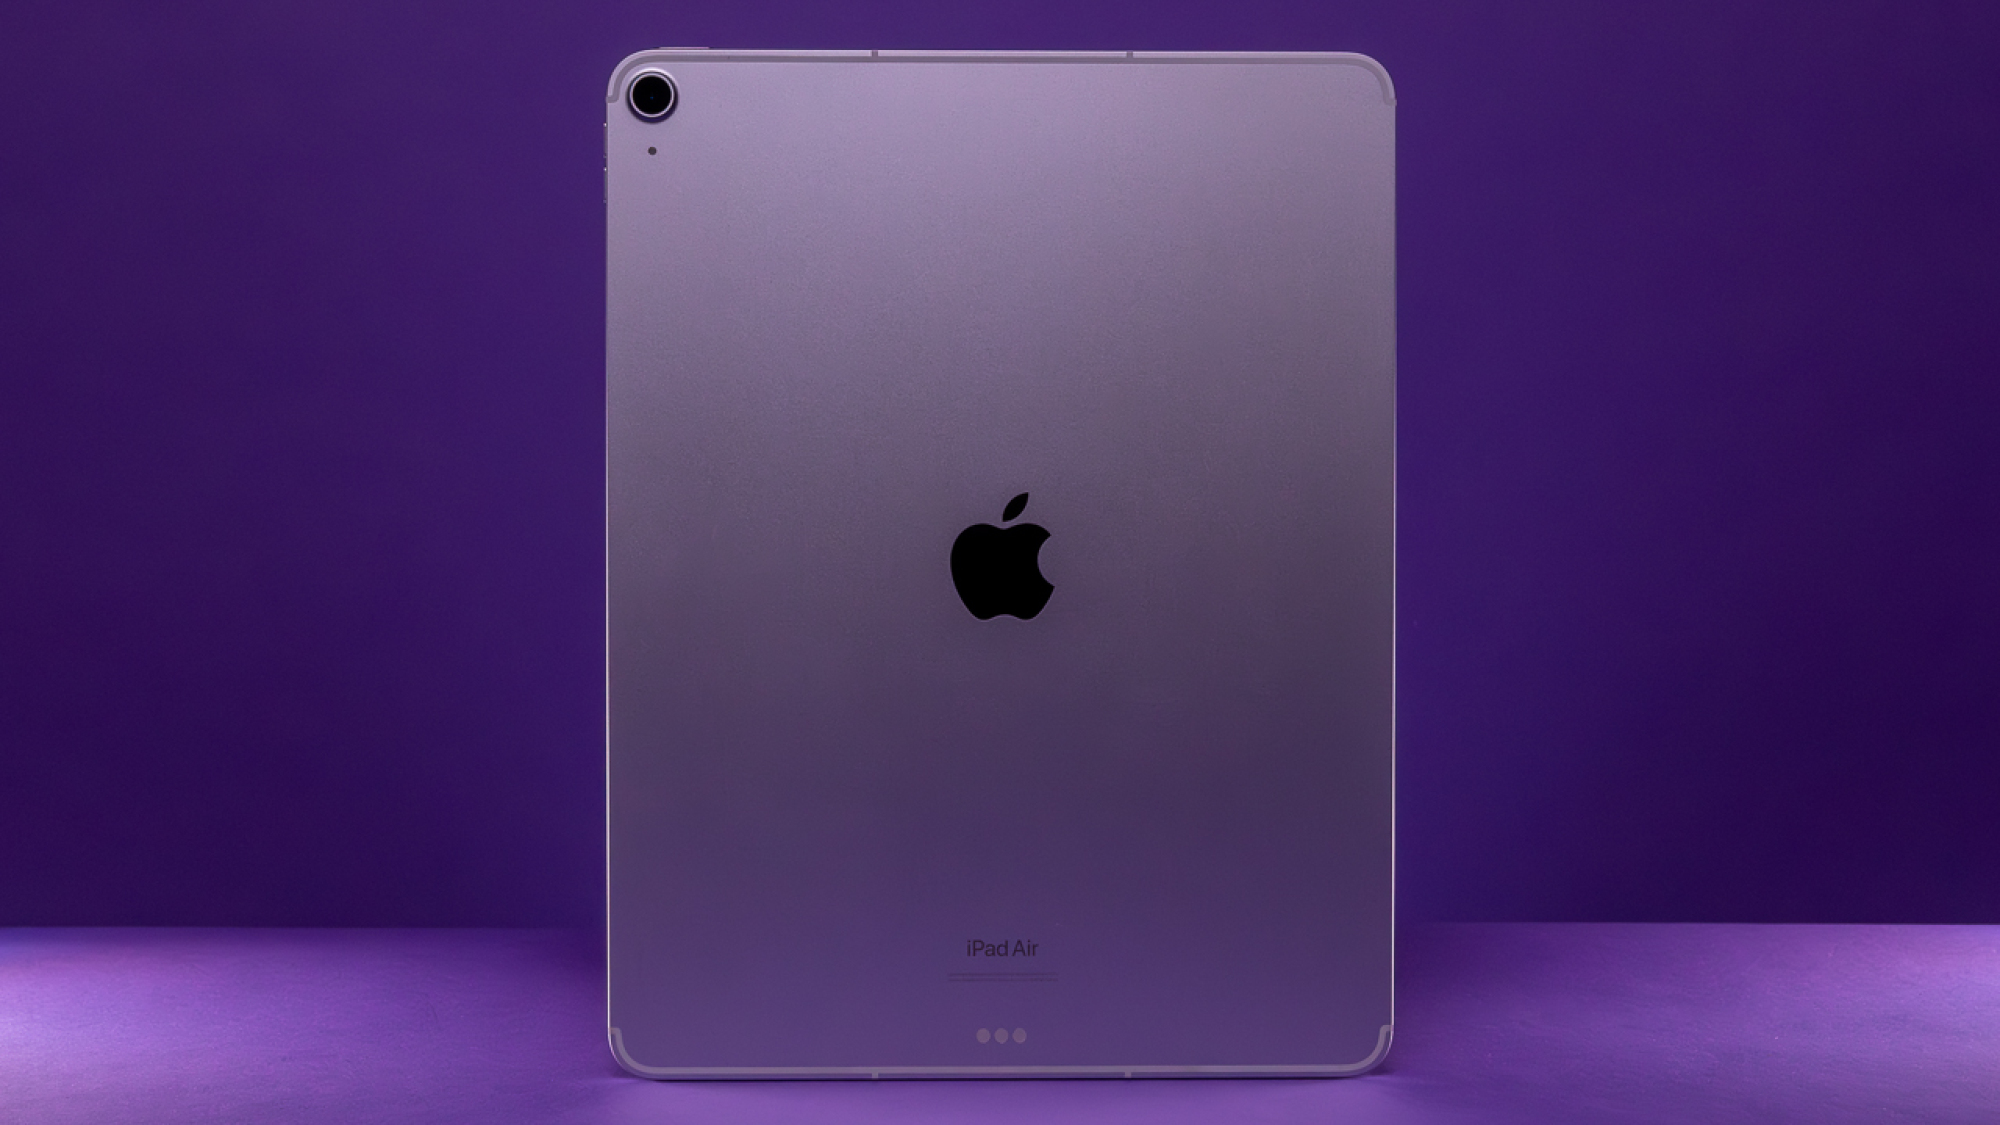 13-inch iPad Air back chassis against purple background